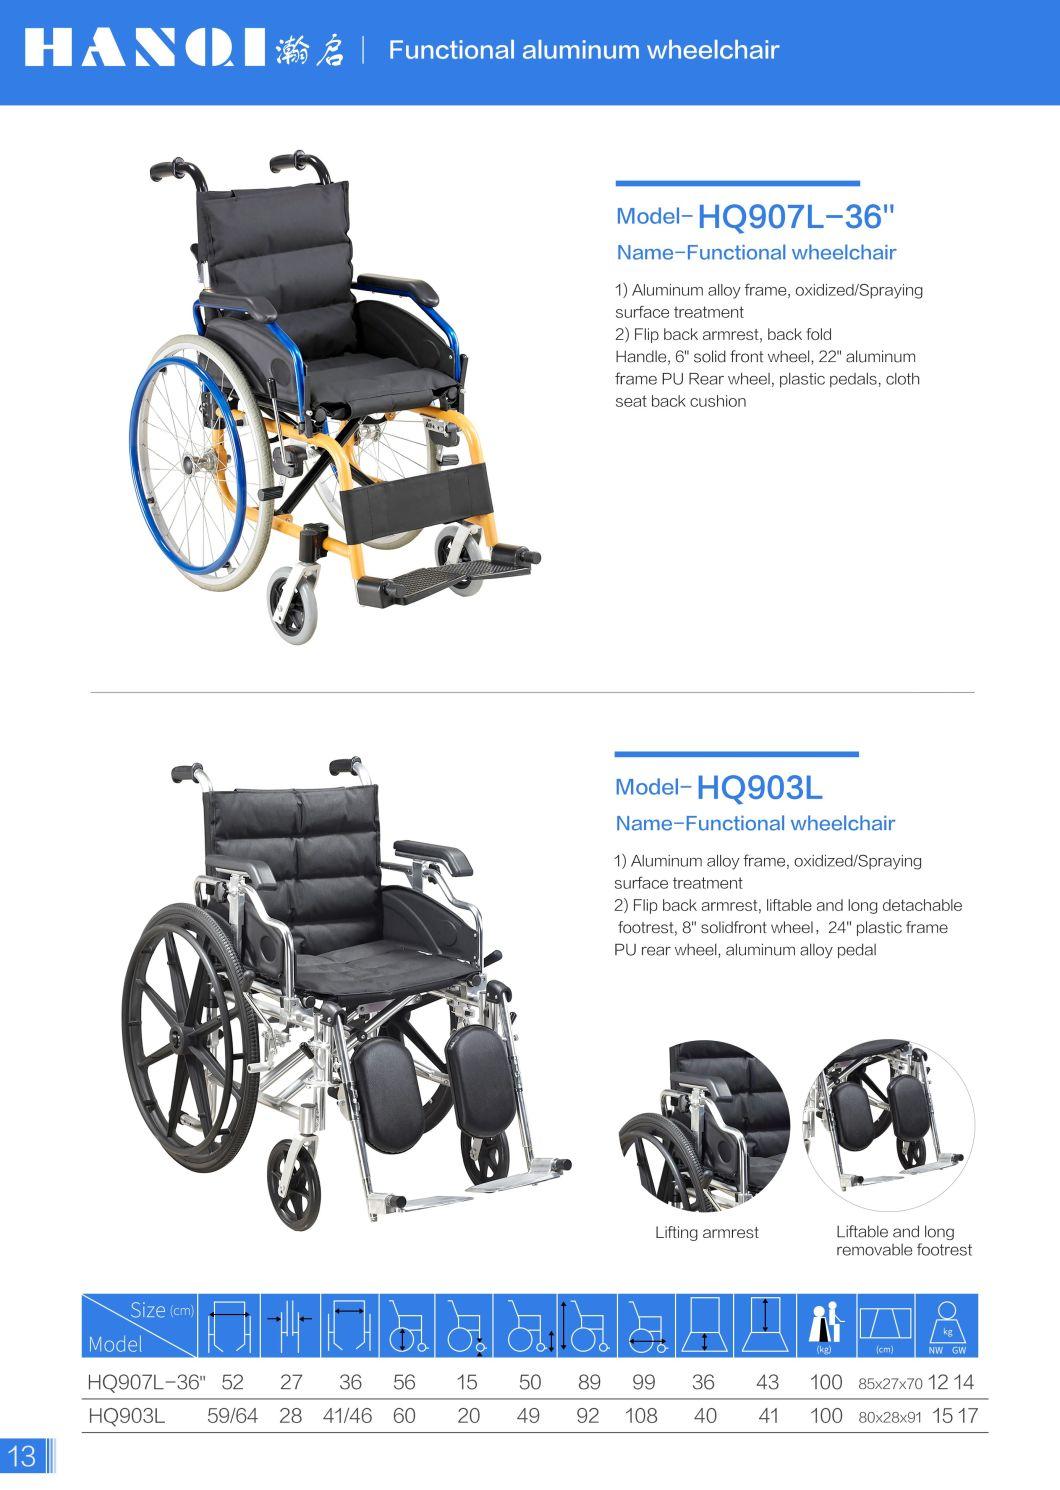 Brand Durable Functional Equipment Heavy Wheelchair at Low Price 1